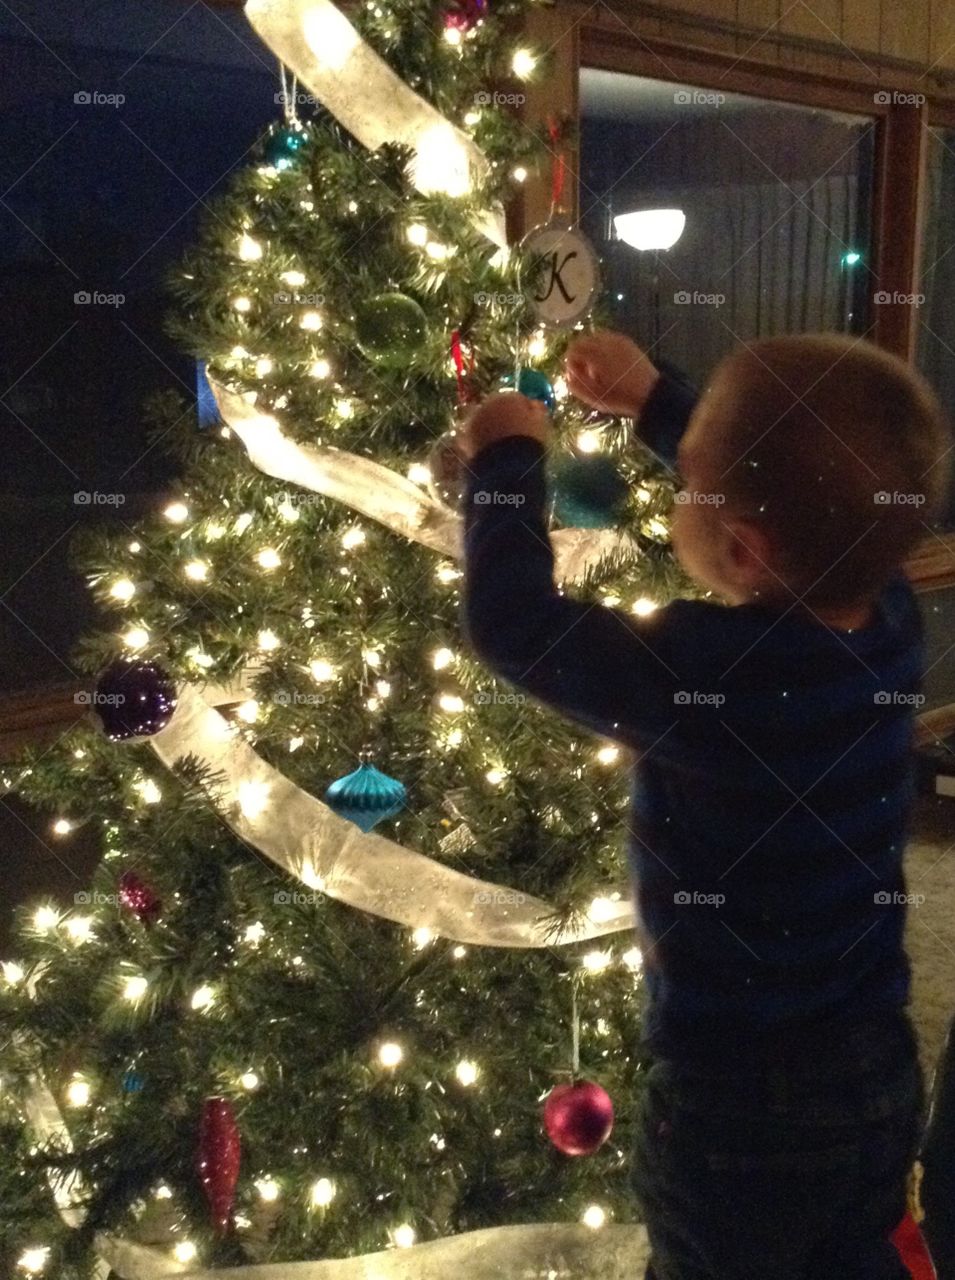 Decorating the tree. Little boy hanging ornaments